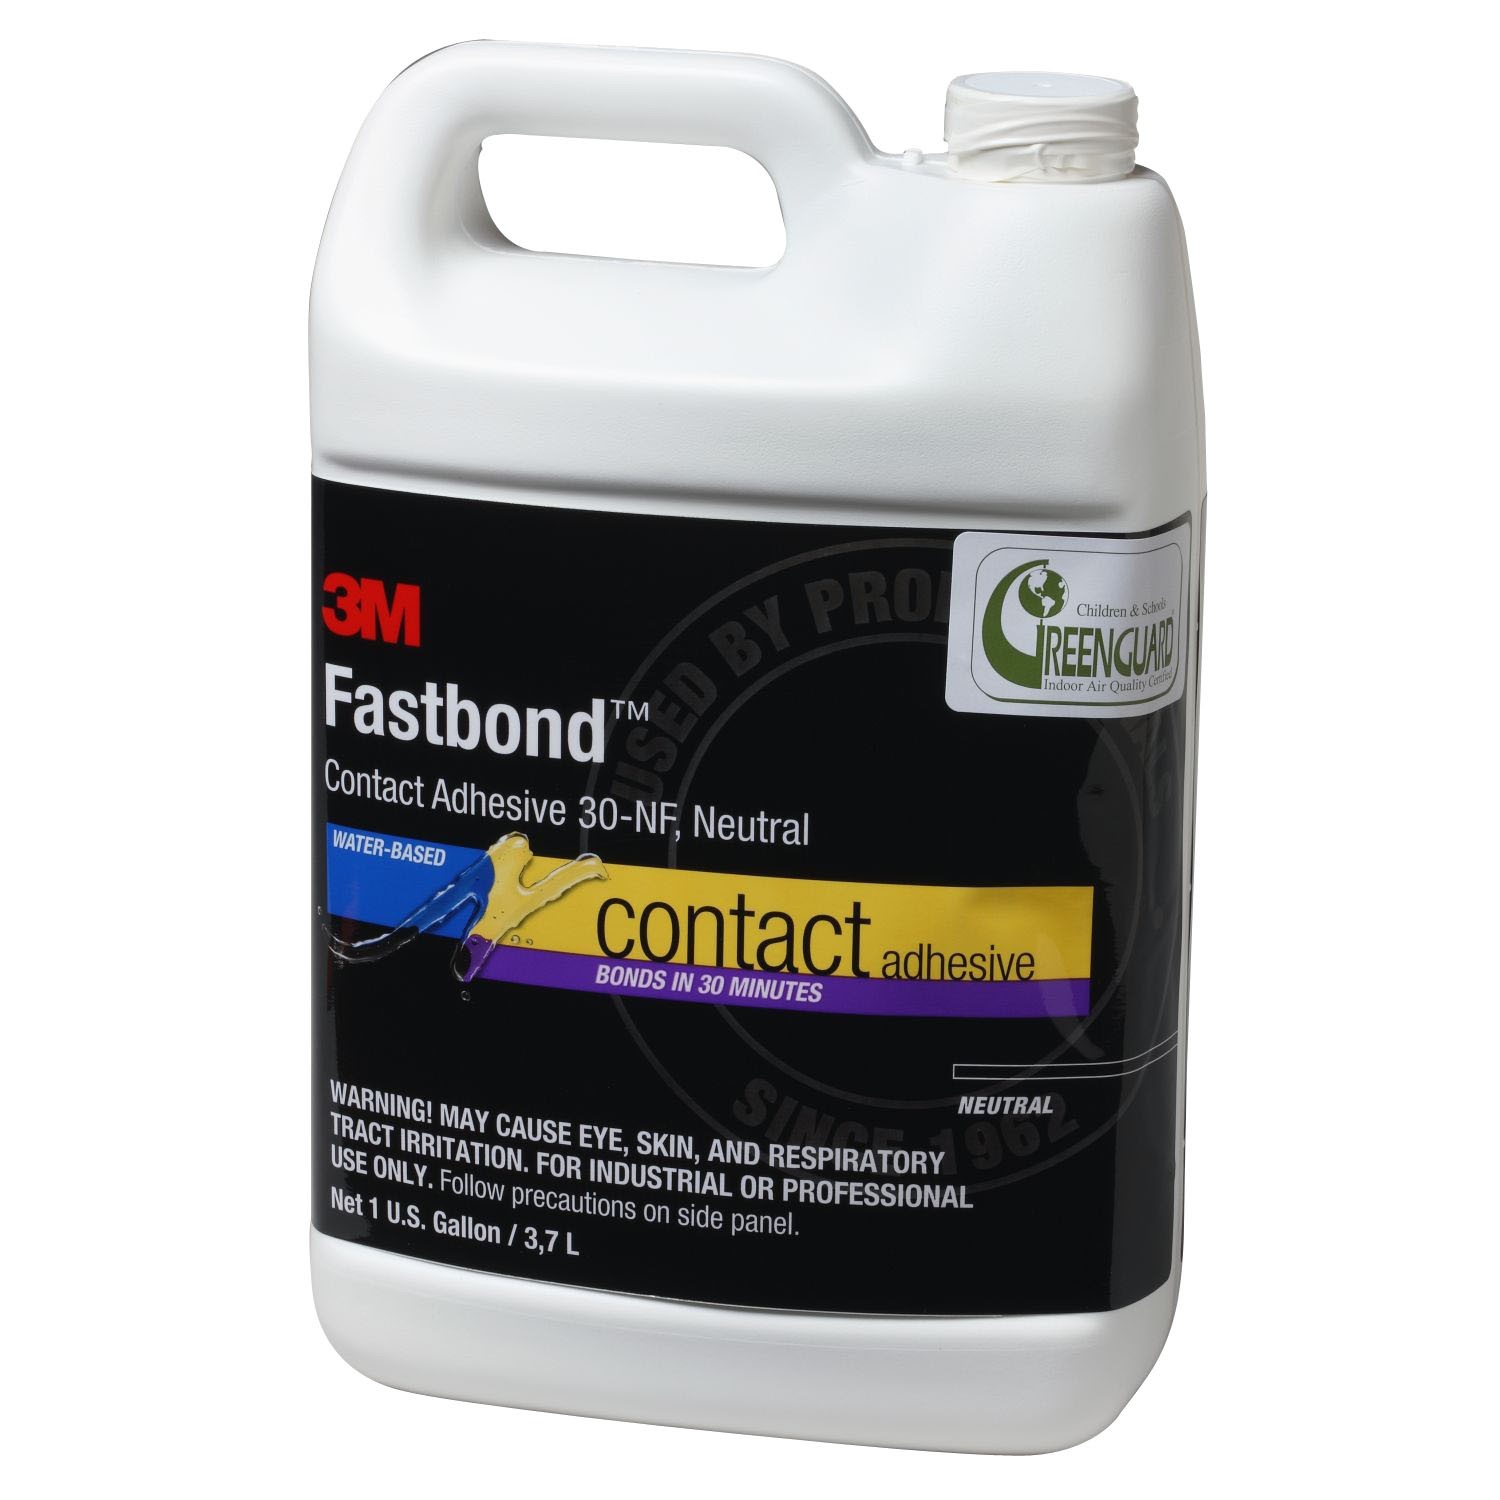 3M™ Fastbond™ Contact Adhesive 30NF Neutral